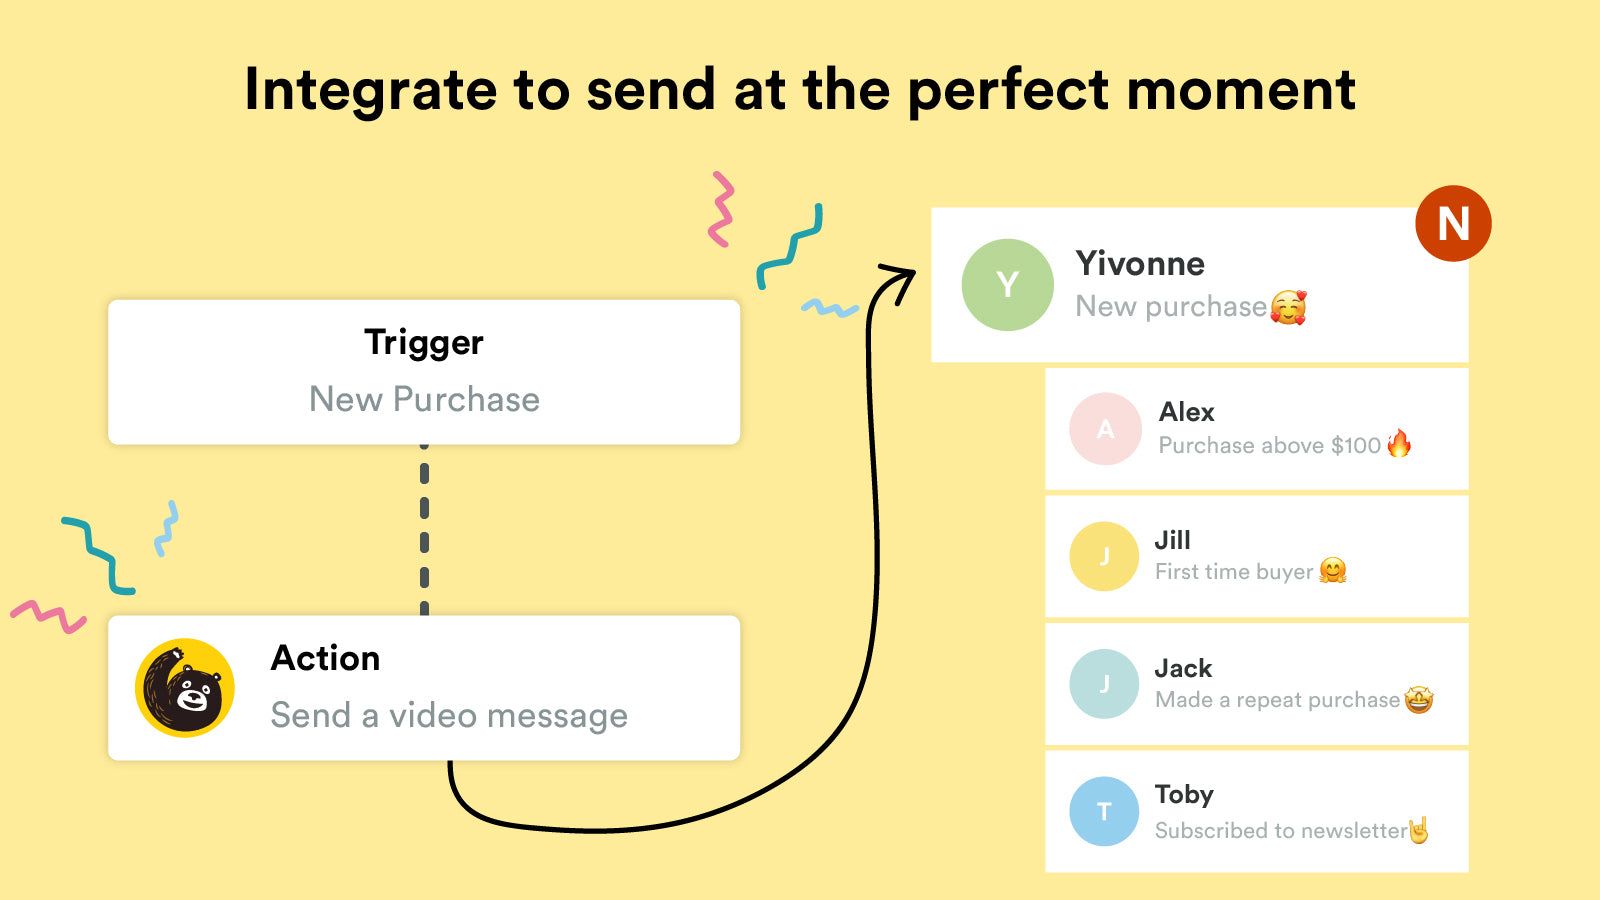 integrate with shopify so you can send videos at perfect moment